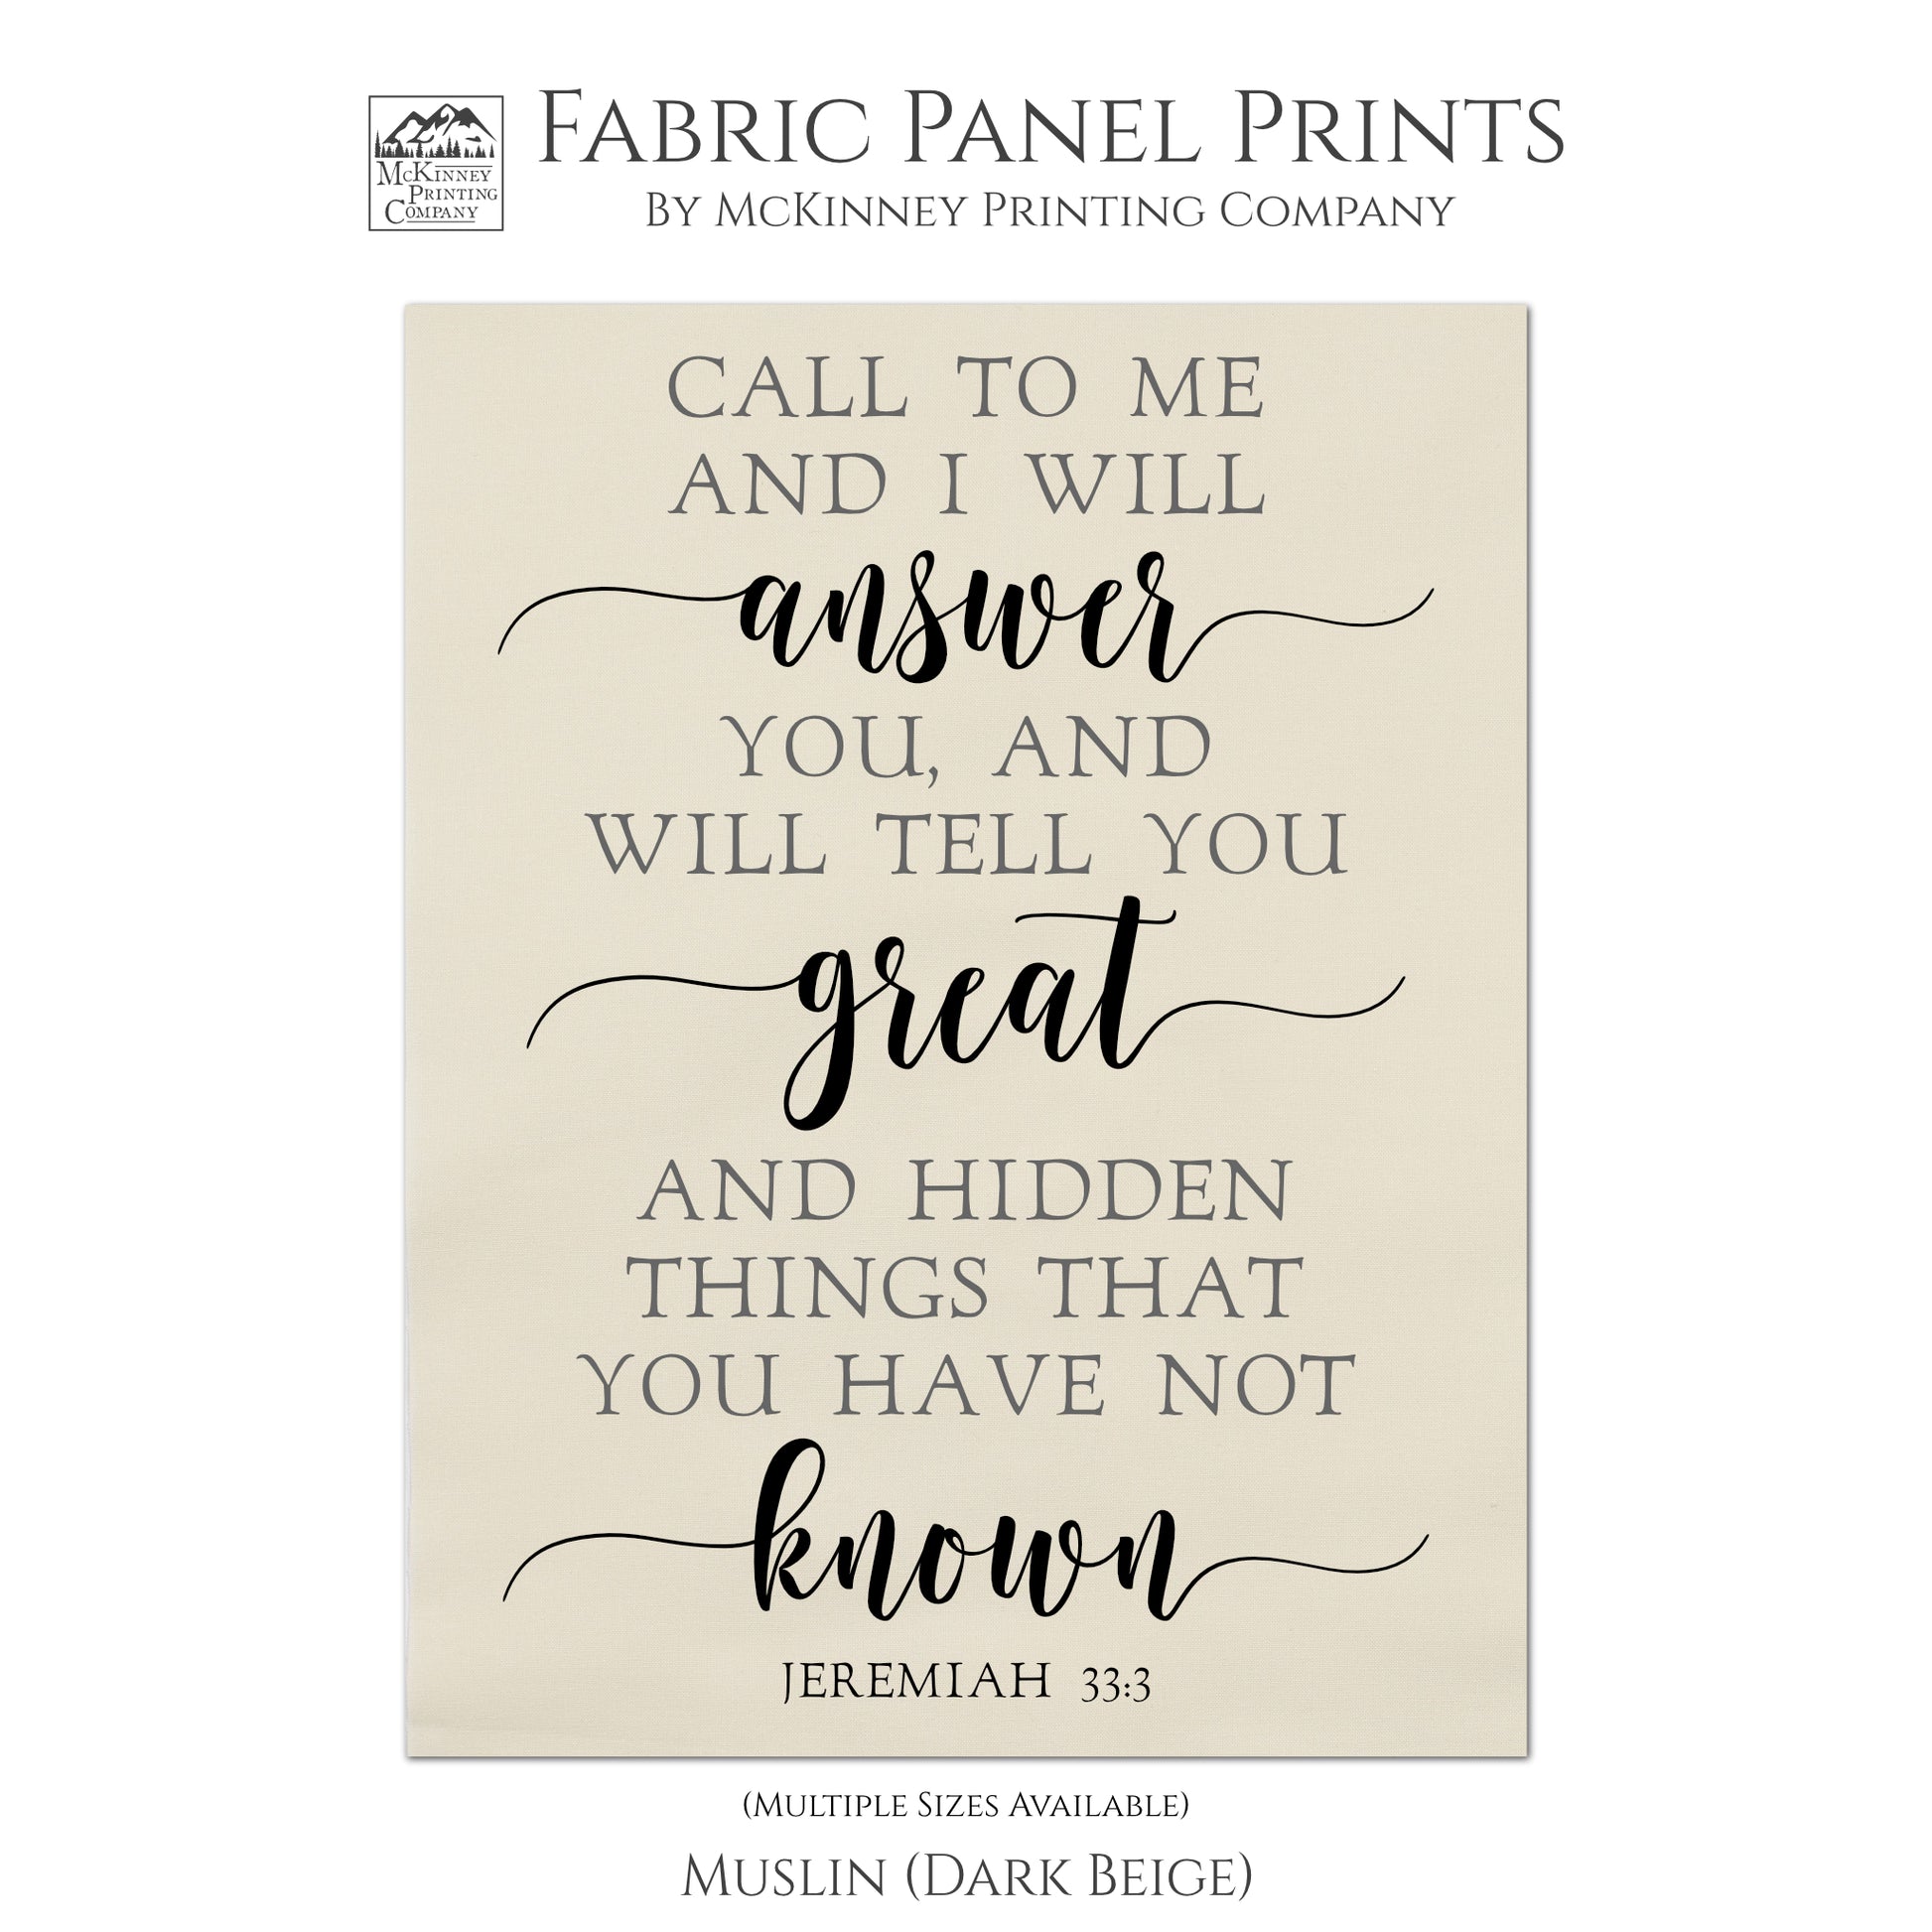 Call to me and I will answer you, and will tell you great and hidden things that you have not known. - Jeremiah 33:3, Quilt Block, Fabric Panel Print, Scripture Fabric - Muslin